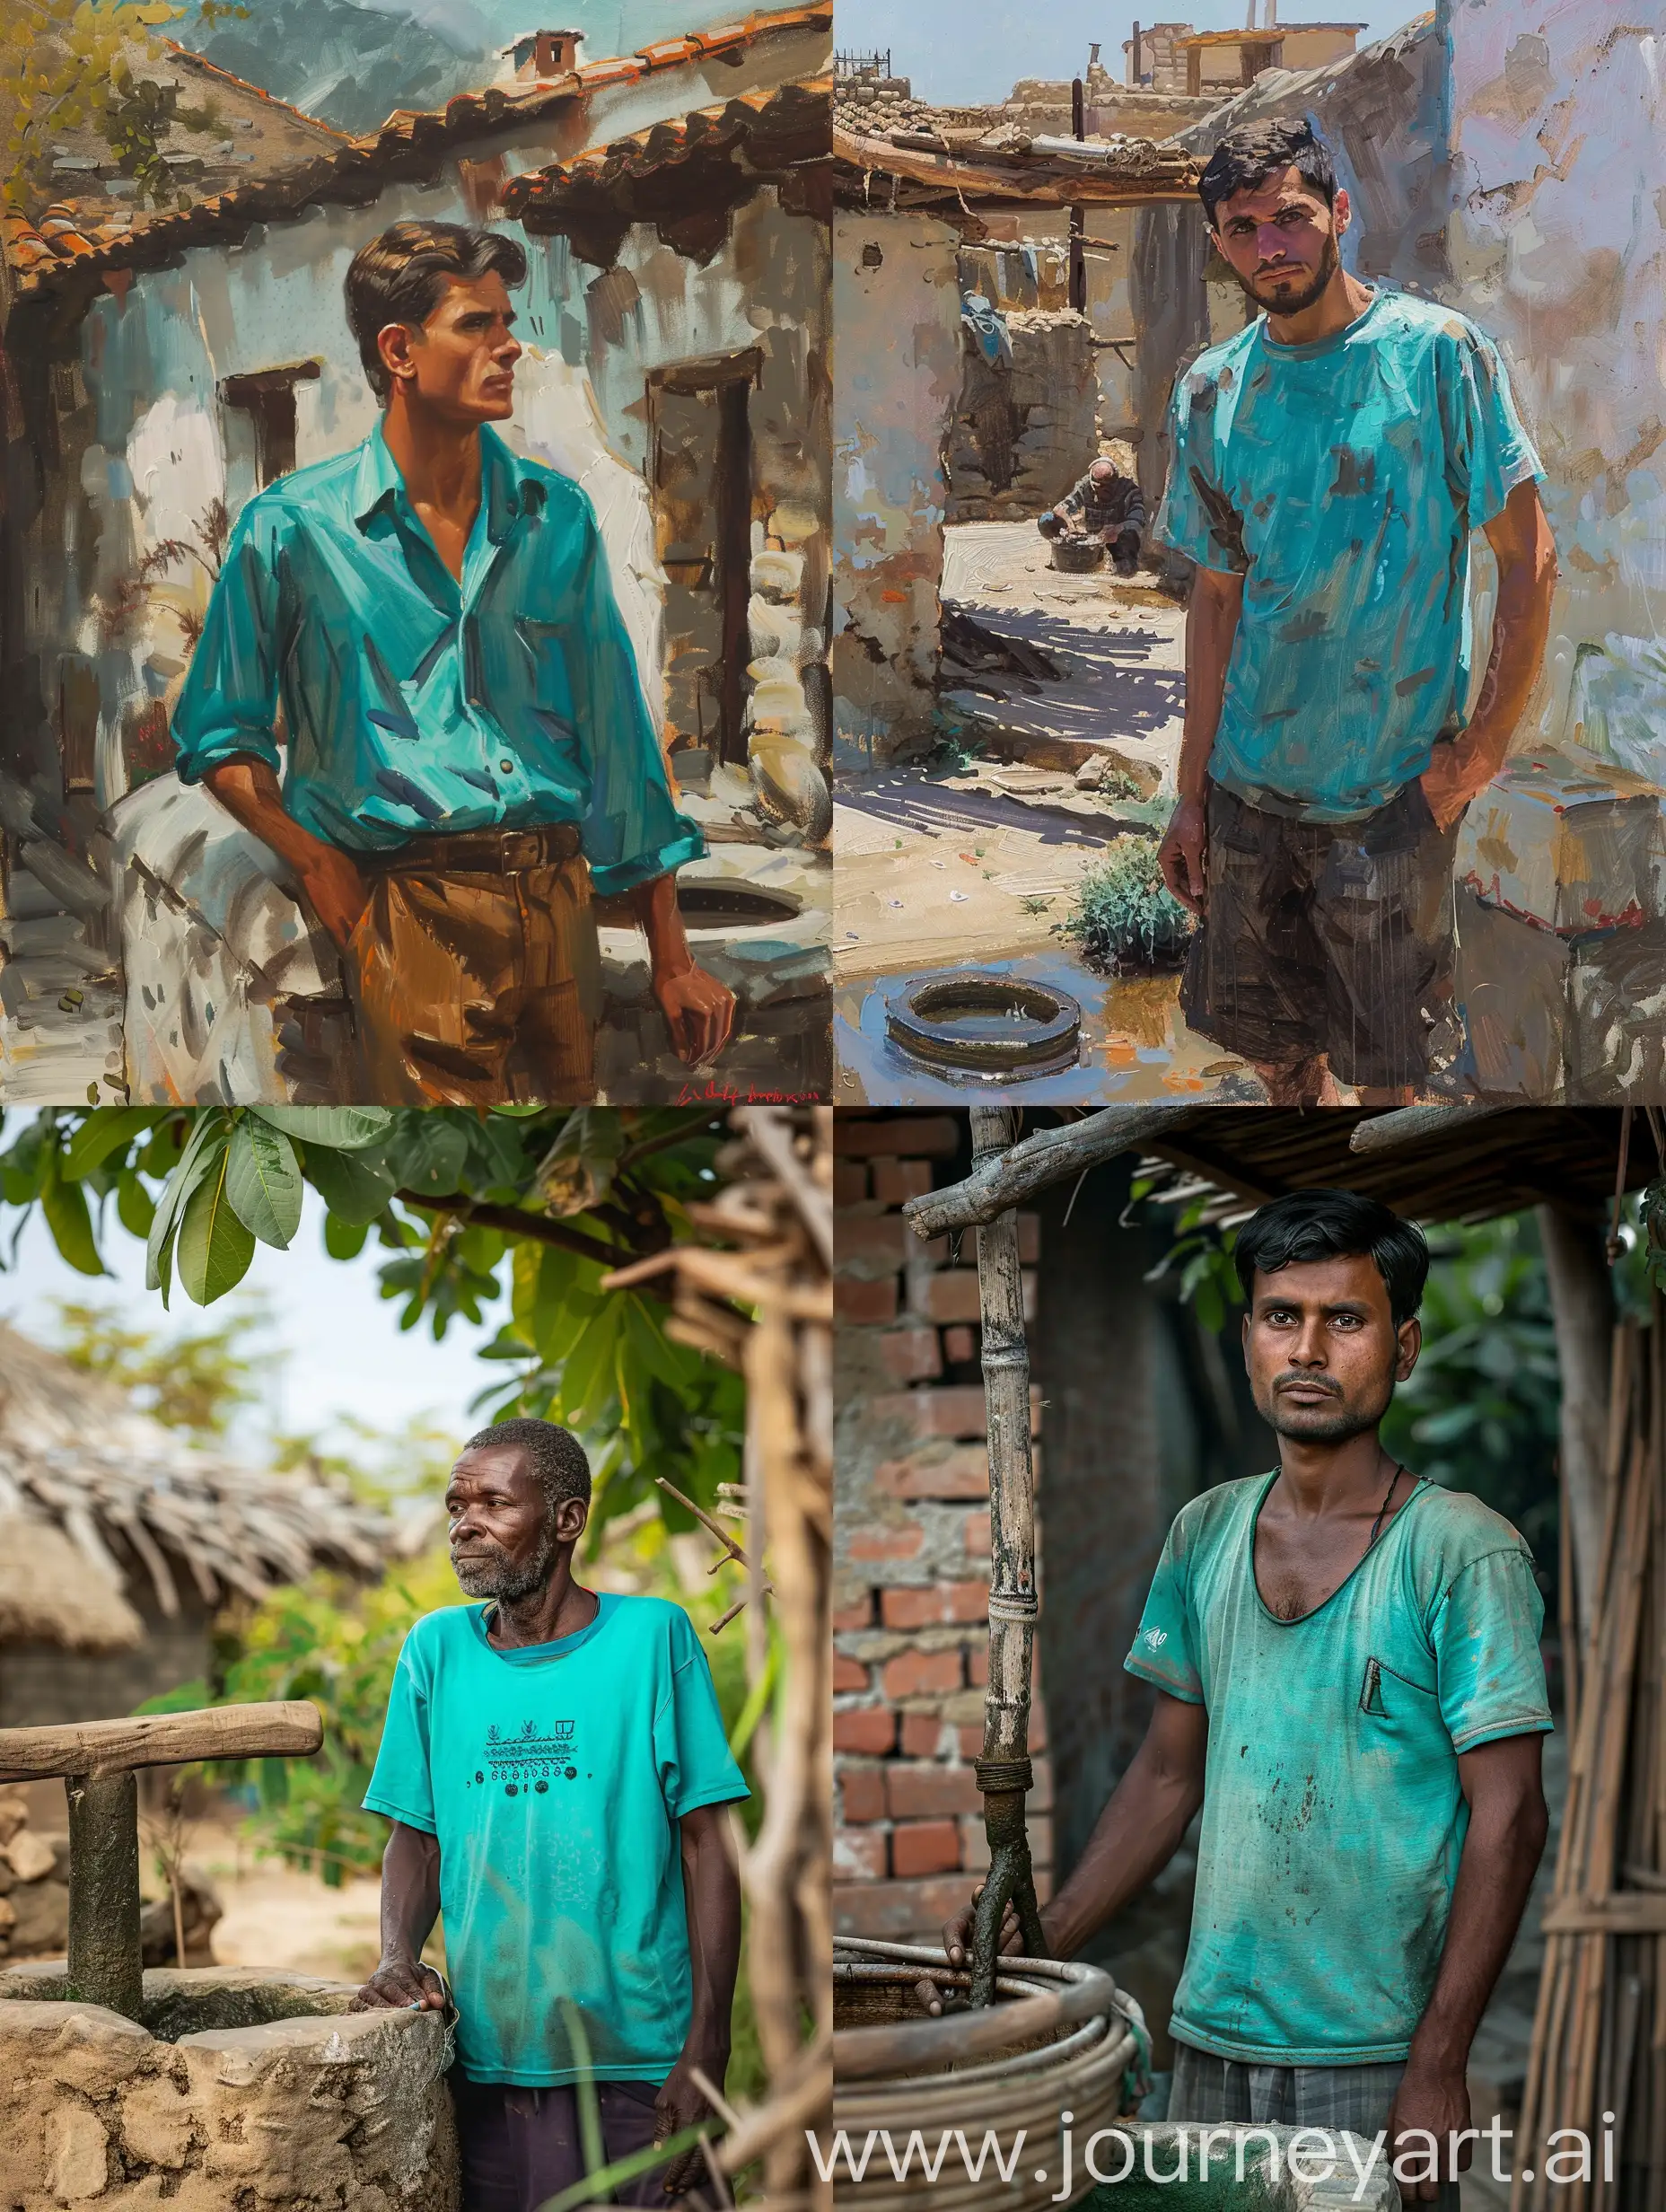 Village-Hero-in-Turquoise-Shirt-Standing-by-the-Well